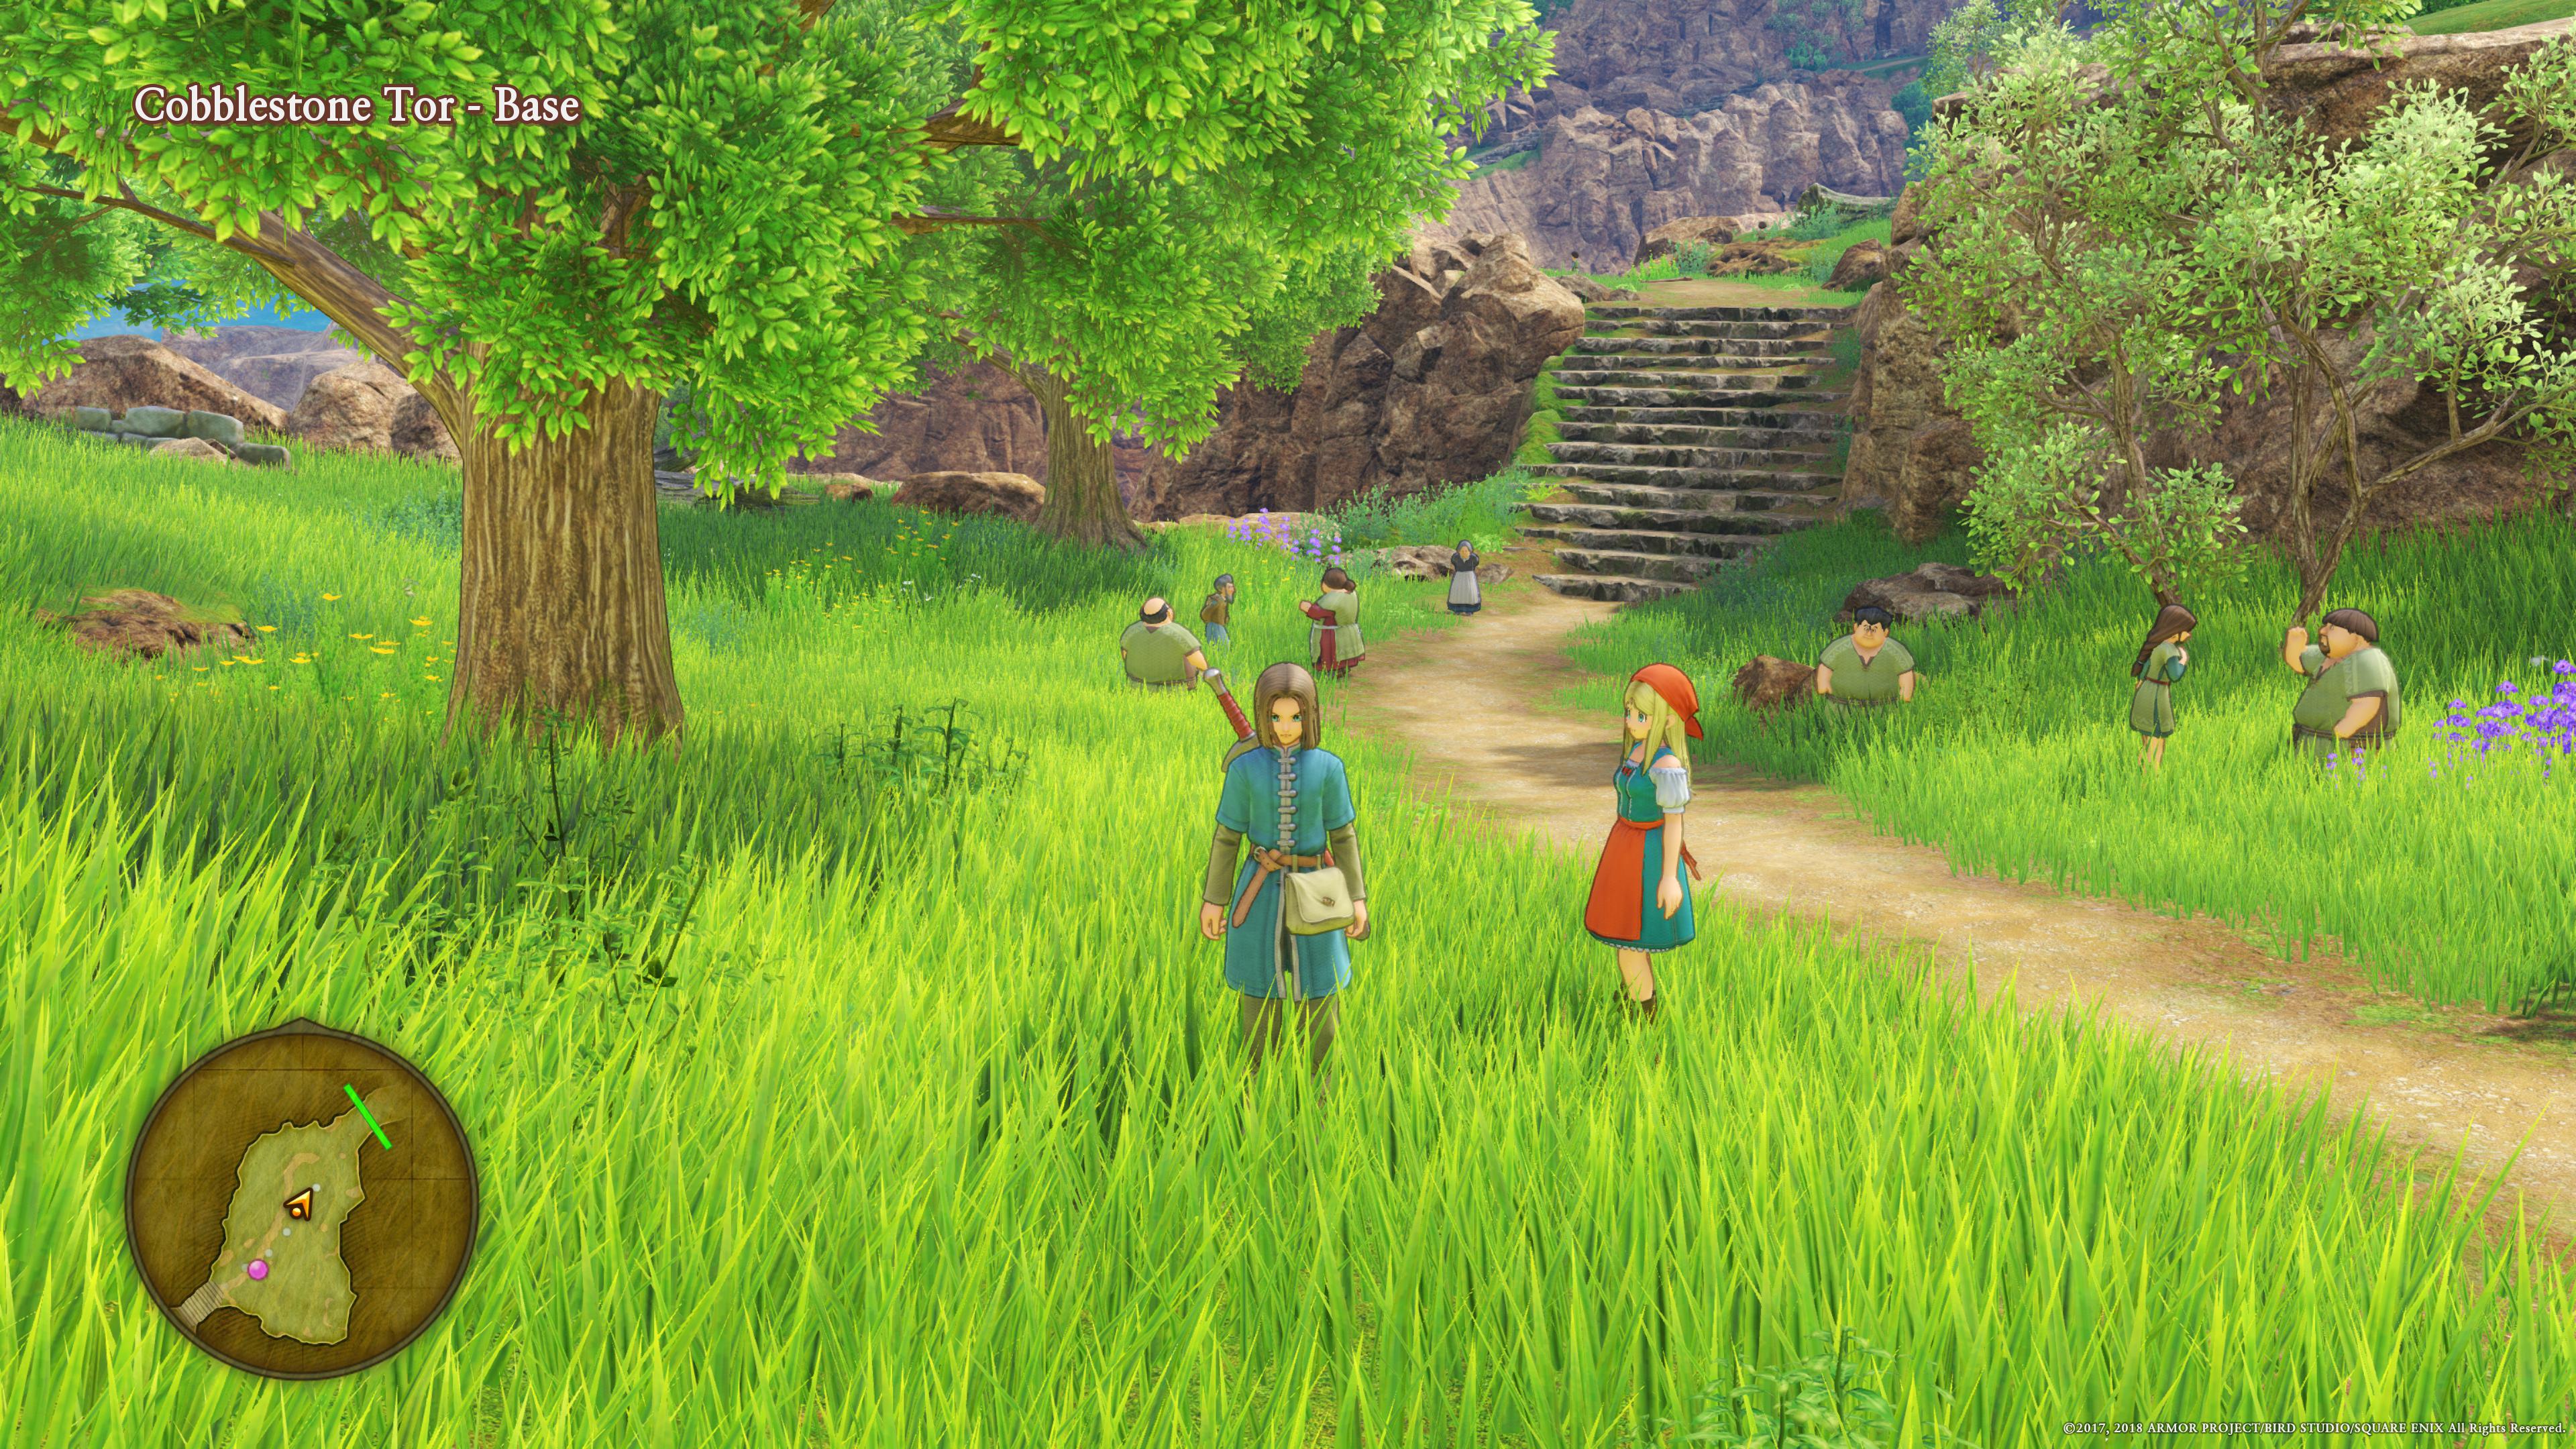 Dragon Quest Xi S Runs At 60fps On Ps4 Pro And Xbox One X Resetera